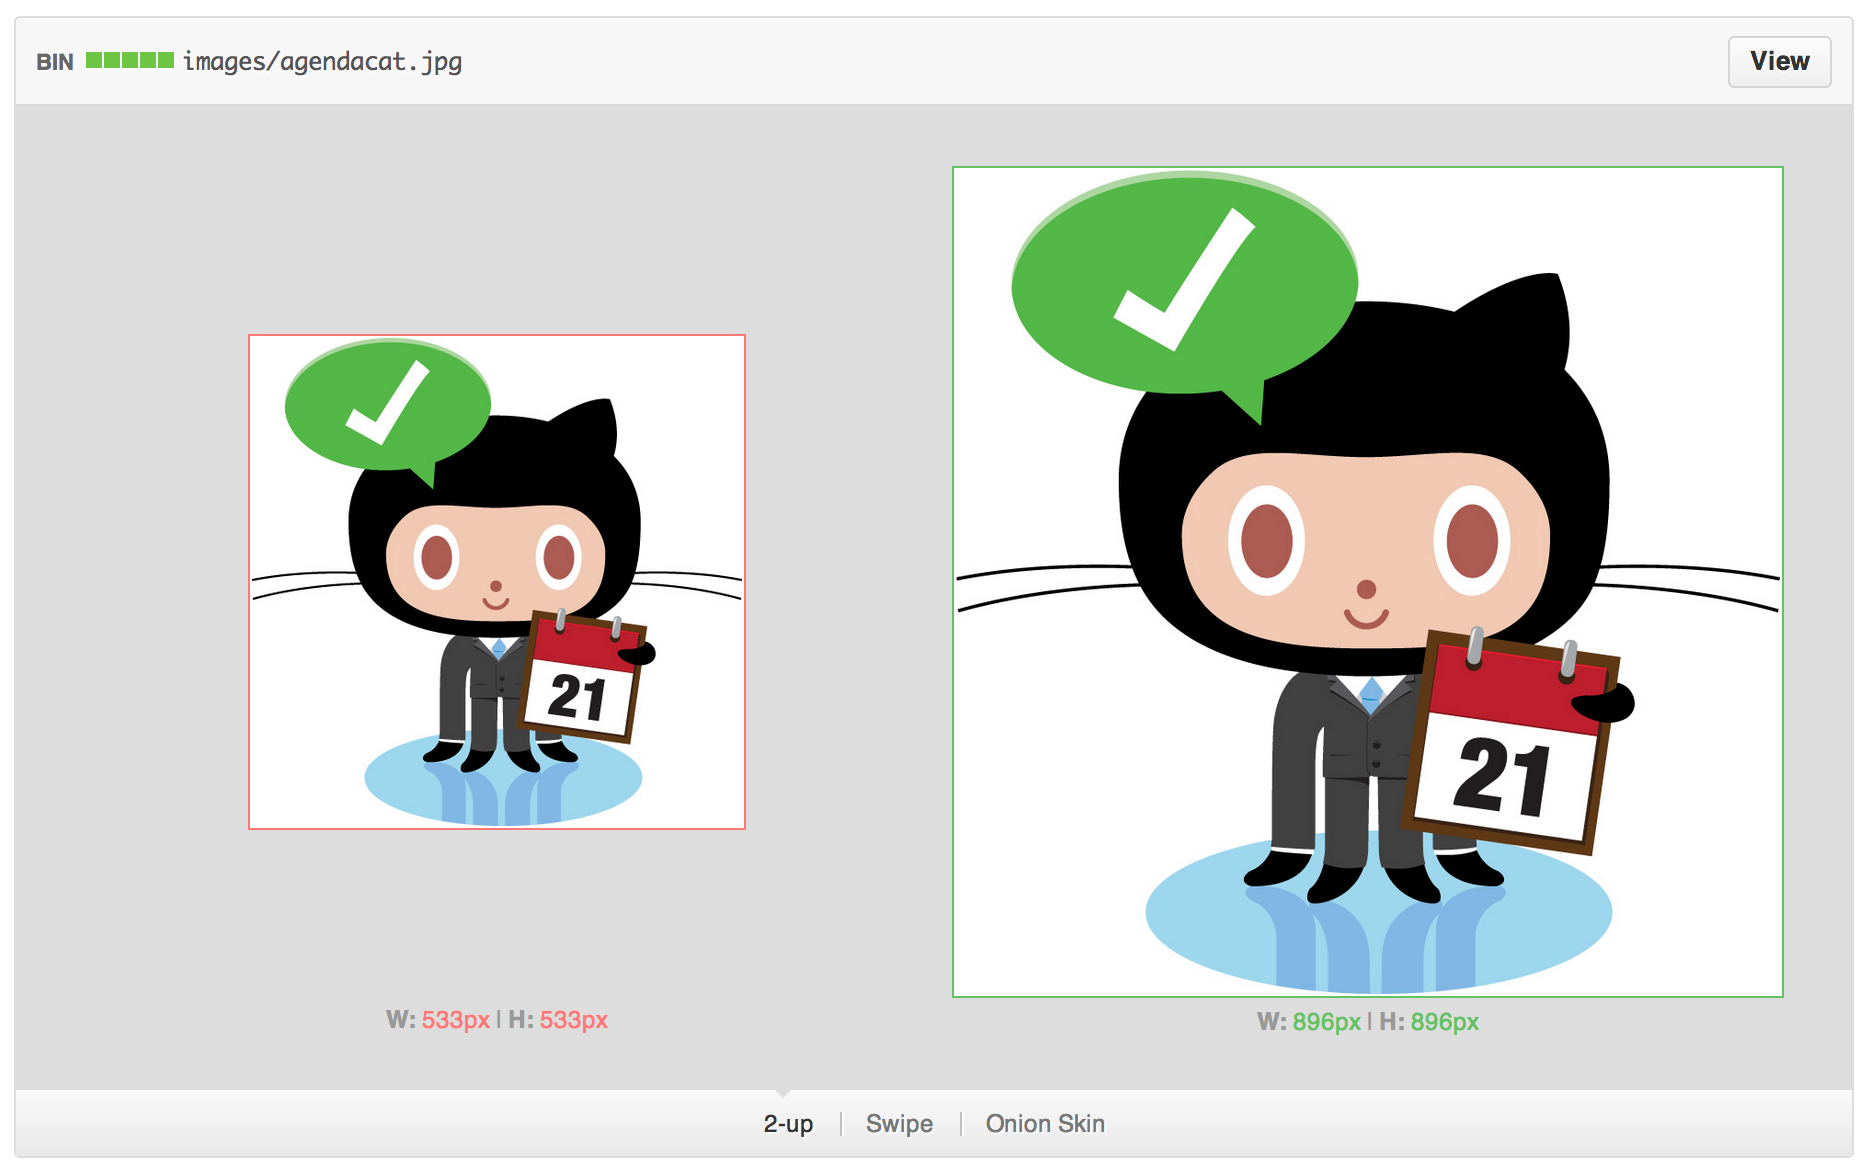 Screenshot of a diff for an image in 2-up mode. The image on the right is outlined in green and larger than the image on the left, which is outlined in red.